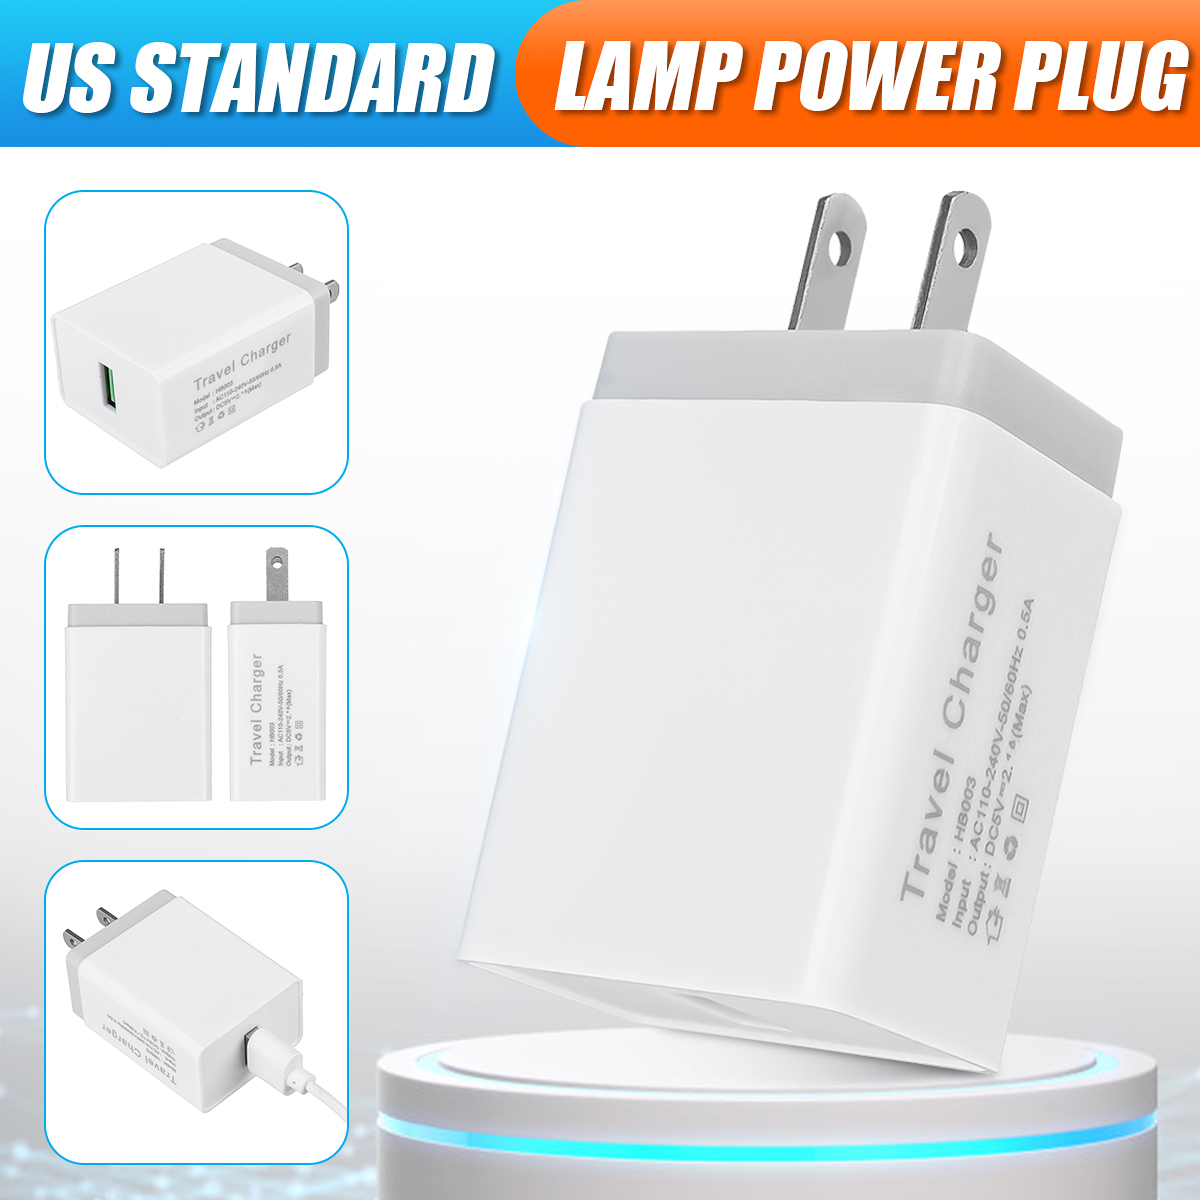 Universal-5V-21A-Lamp-Power-Travel-Charger-US-Standard-Plug-USB-Adapter-1620556-1